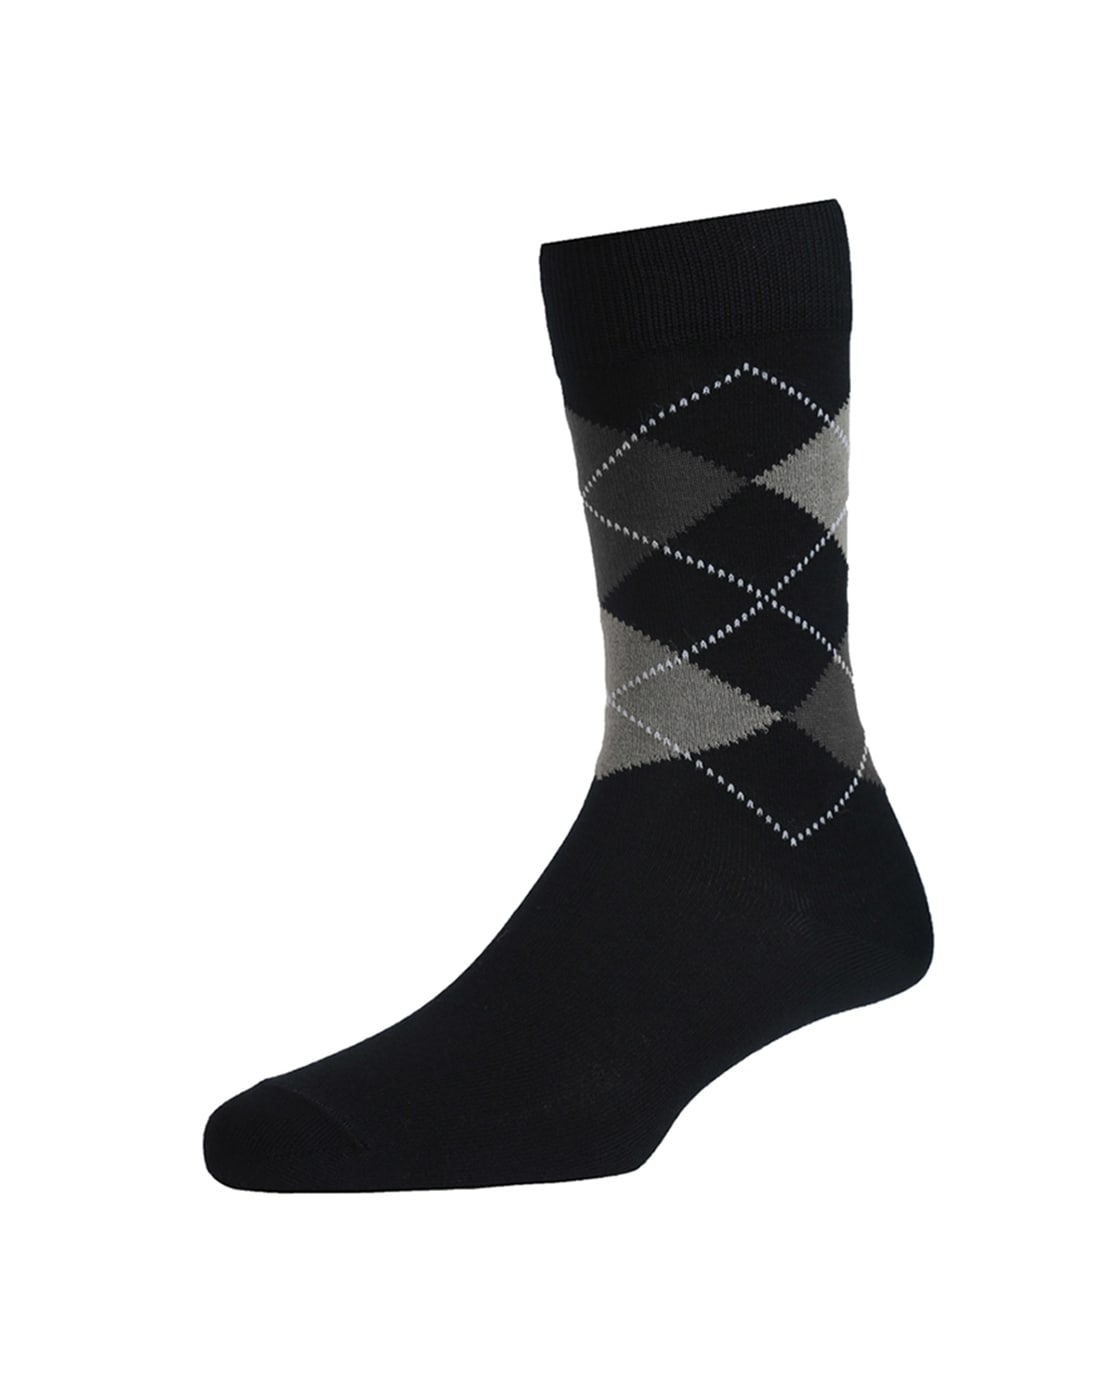 Alpine Swiss Mens Cotton 6 Pack Dress Socks Striped  Argyle Bold Color  Pack  Amazonin Clothing  Accessories